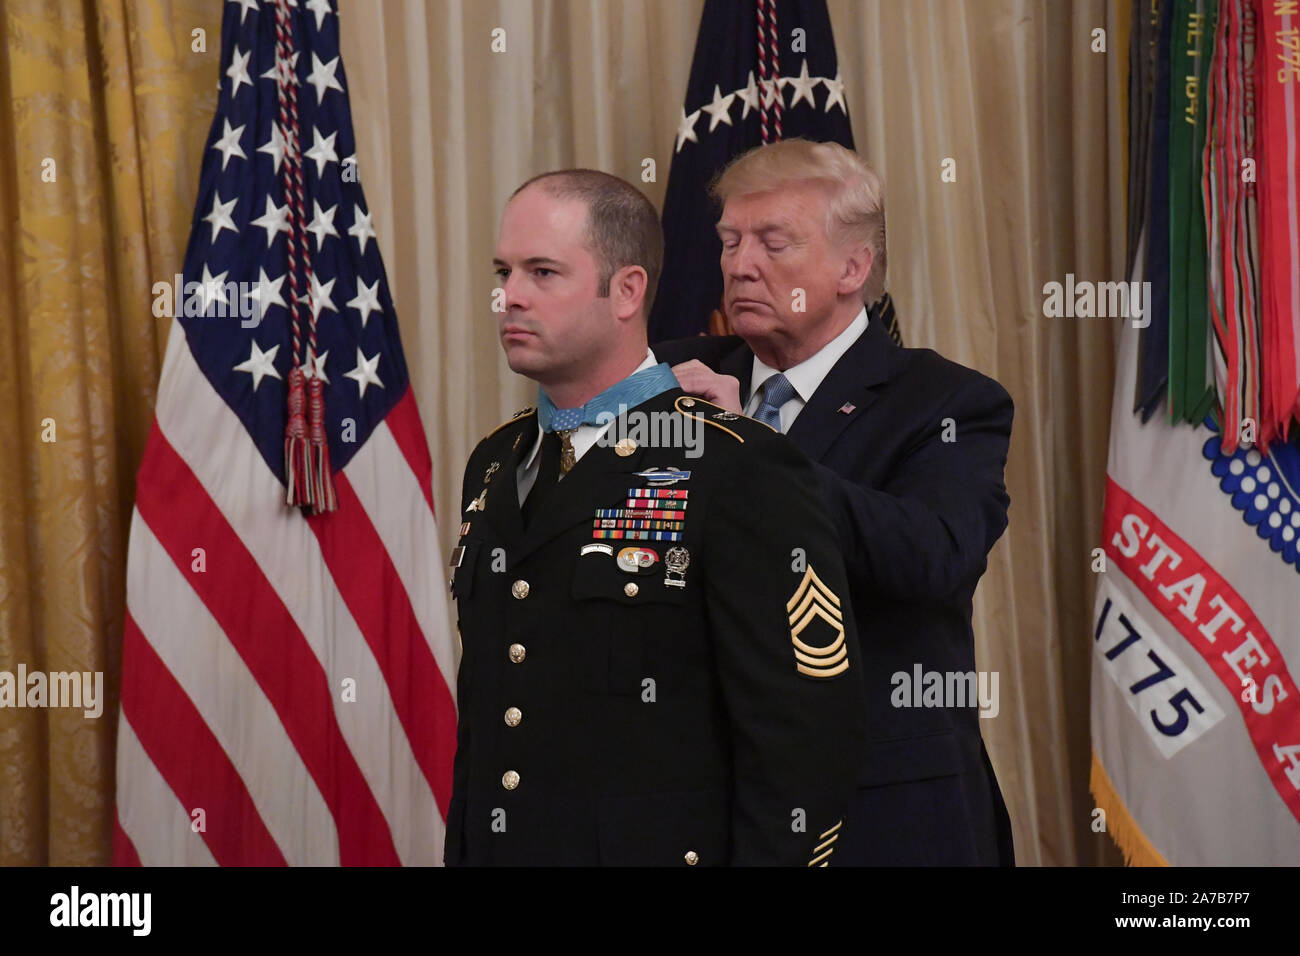 President Donald J. Trump presents the Medal of Honor to U.S. Army Master Sgt. Matthew O. Williams during a ceremony at the White House in Washington, D.C., Oct. 30, 2019. Williams was awarded the Medal of Honor for his actions while serving as a weapons sergeant with the Special Forces Operational Detachment Alpha 3336, Special Operations Task Force-33, in support of Operation Enduring Freedom in Afghanistan on April 6, 2008. (U.S. Army Photo by Sgt. Keisha Brown) Stock Photo